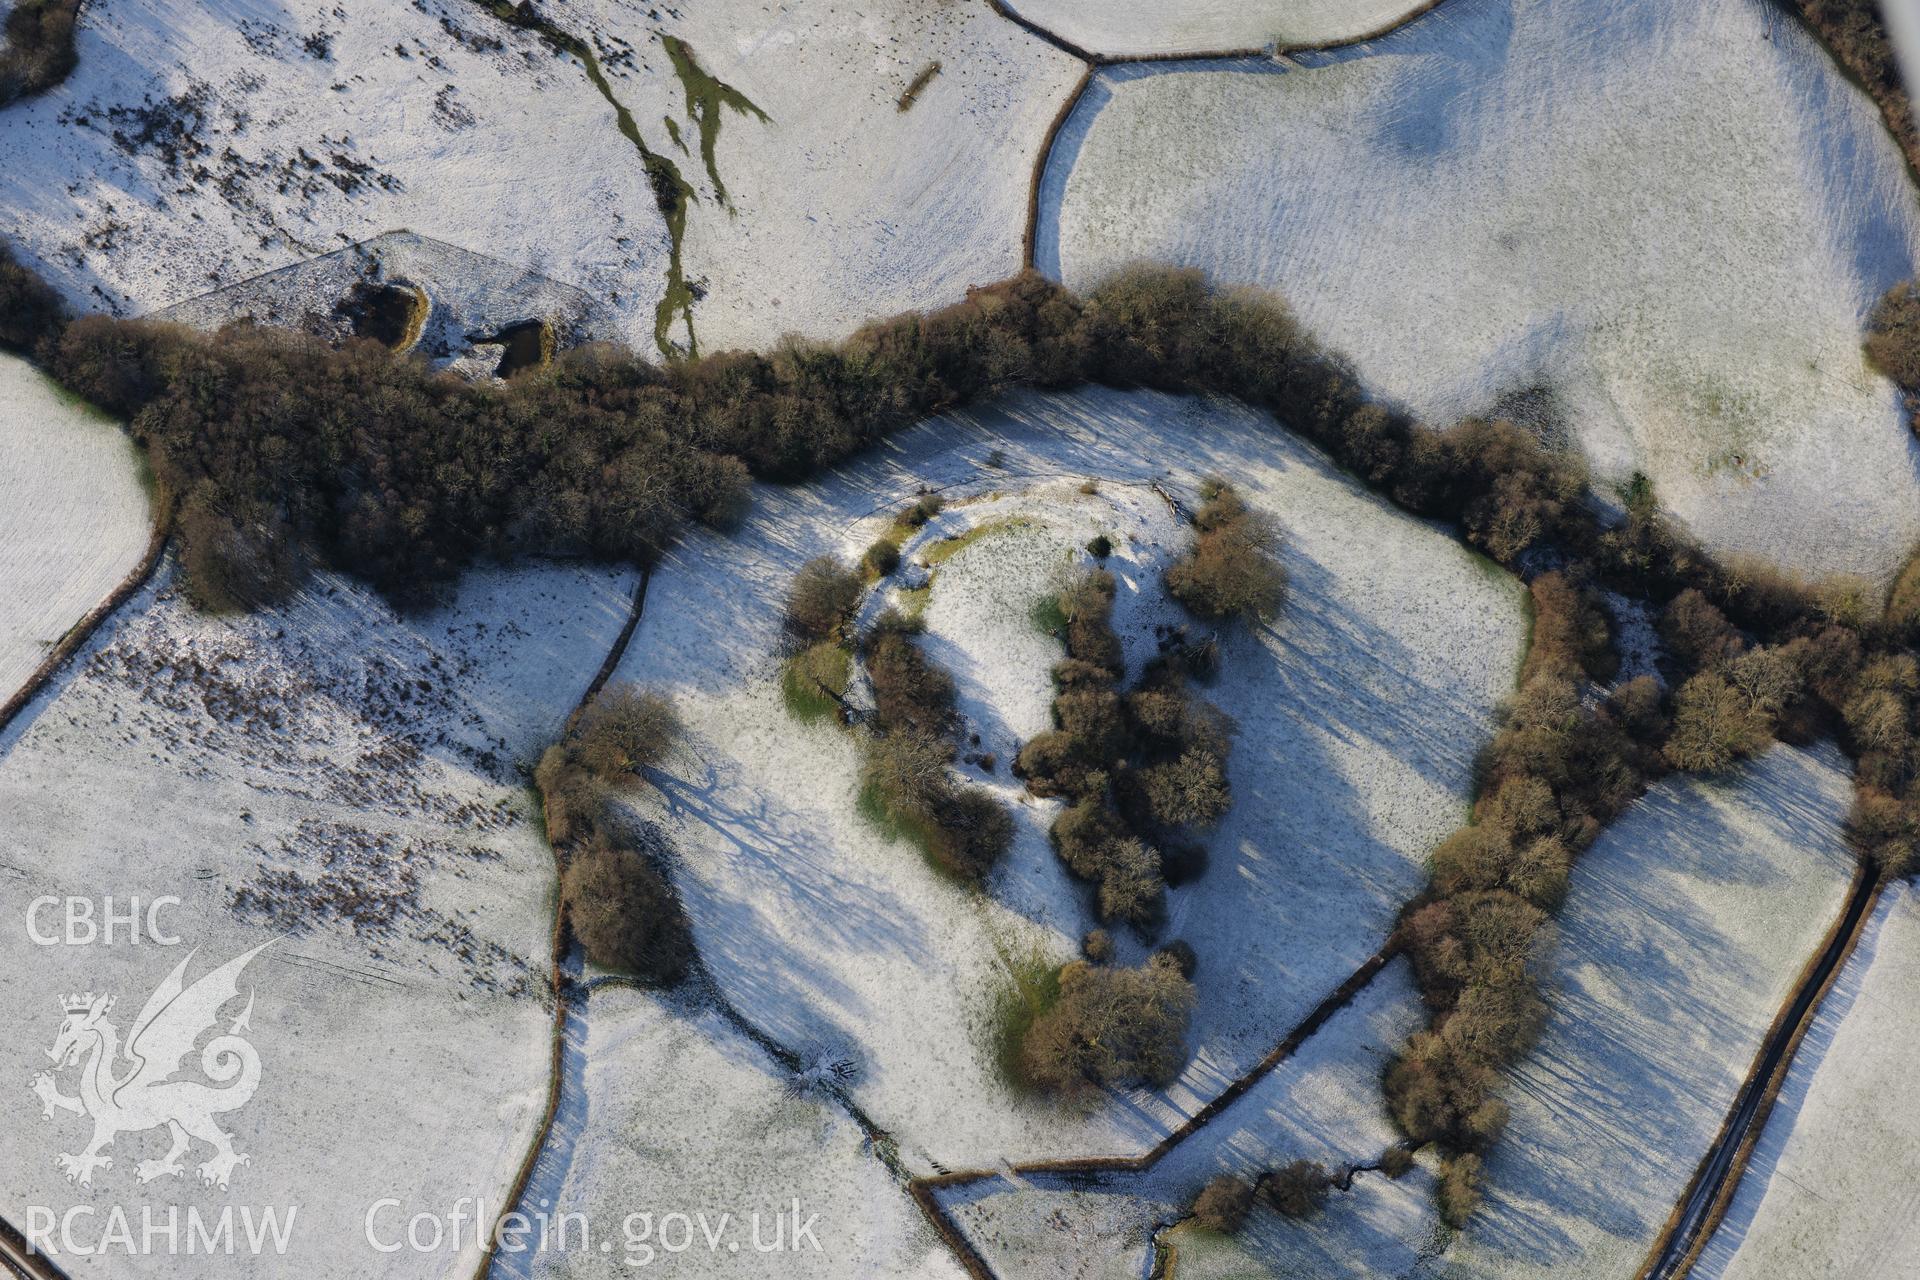 Crickadarn Castle earthworks, south east of Builth Wells. Oblique aerial photograph taken during the Royal Commission?s programme of archaeological aerial reconnaissance by Toby Driver on 15th January 2013.